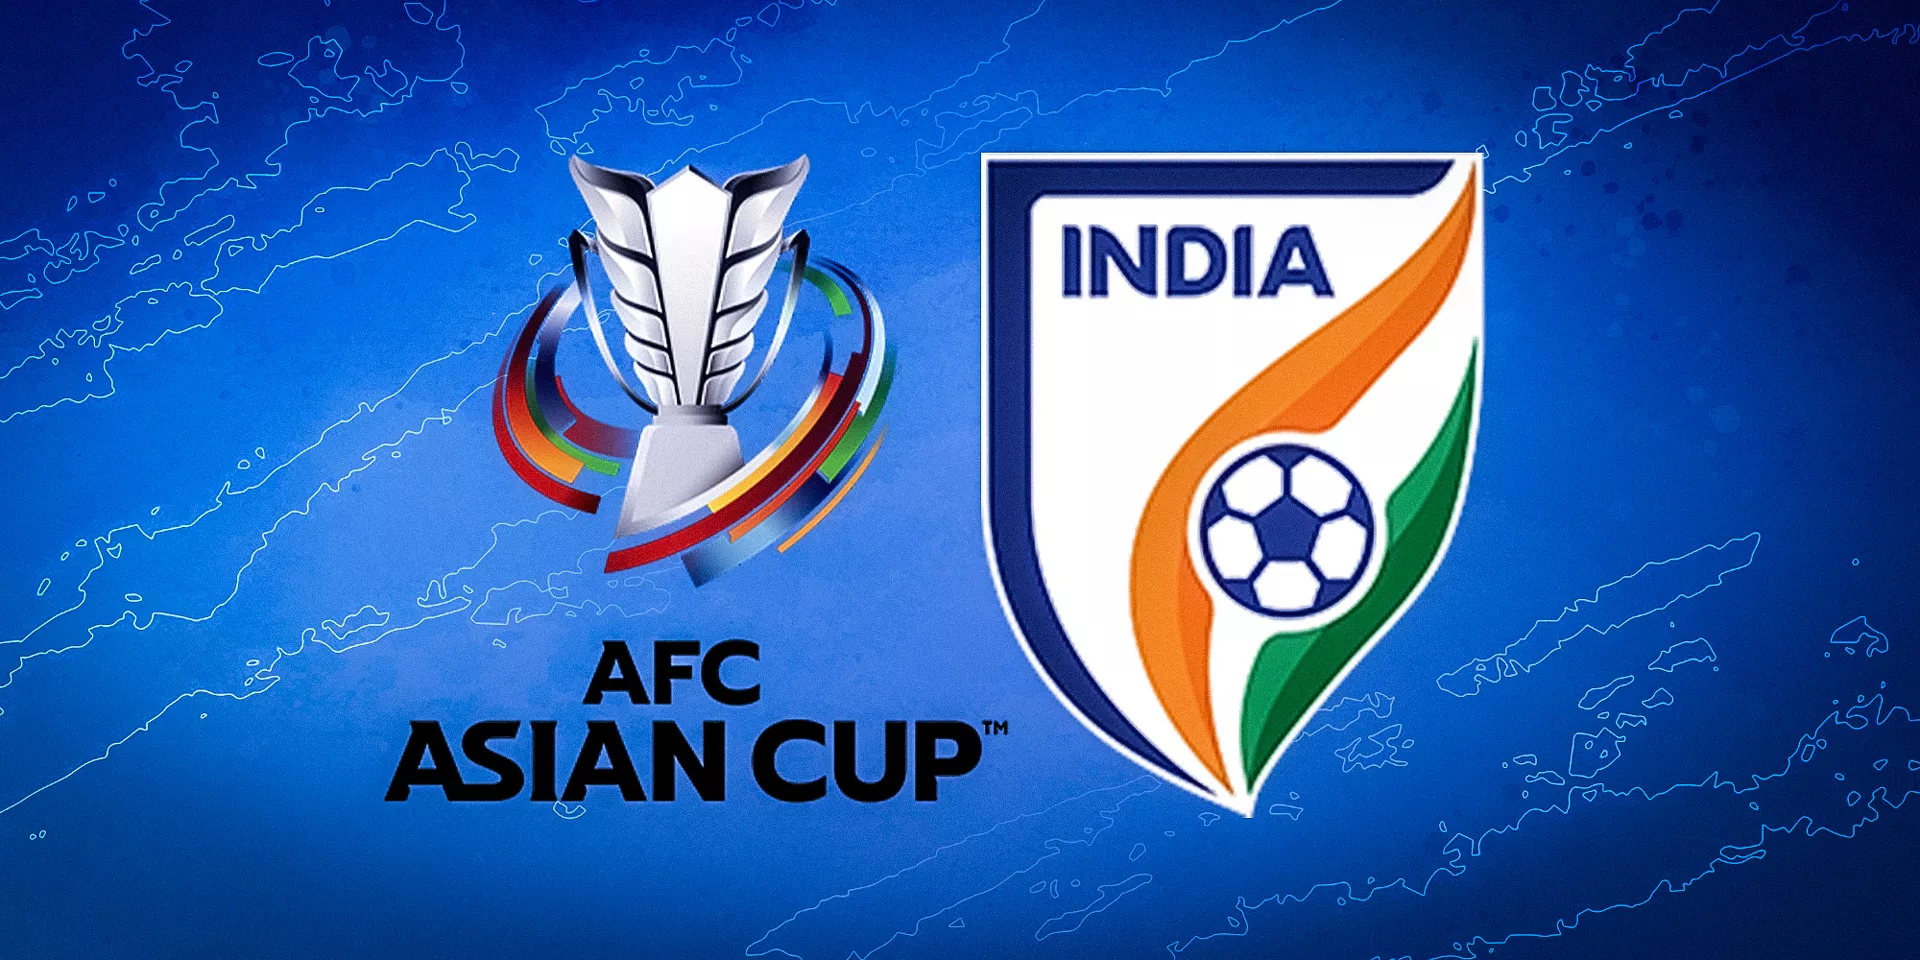 This will be the best edition of the tournament, asserts CEO of the AFC Asian Cup